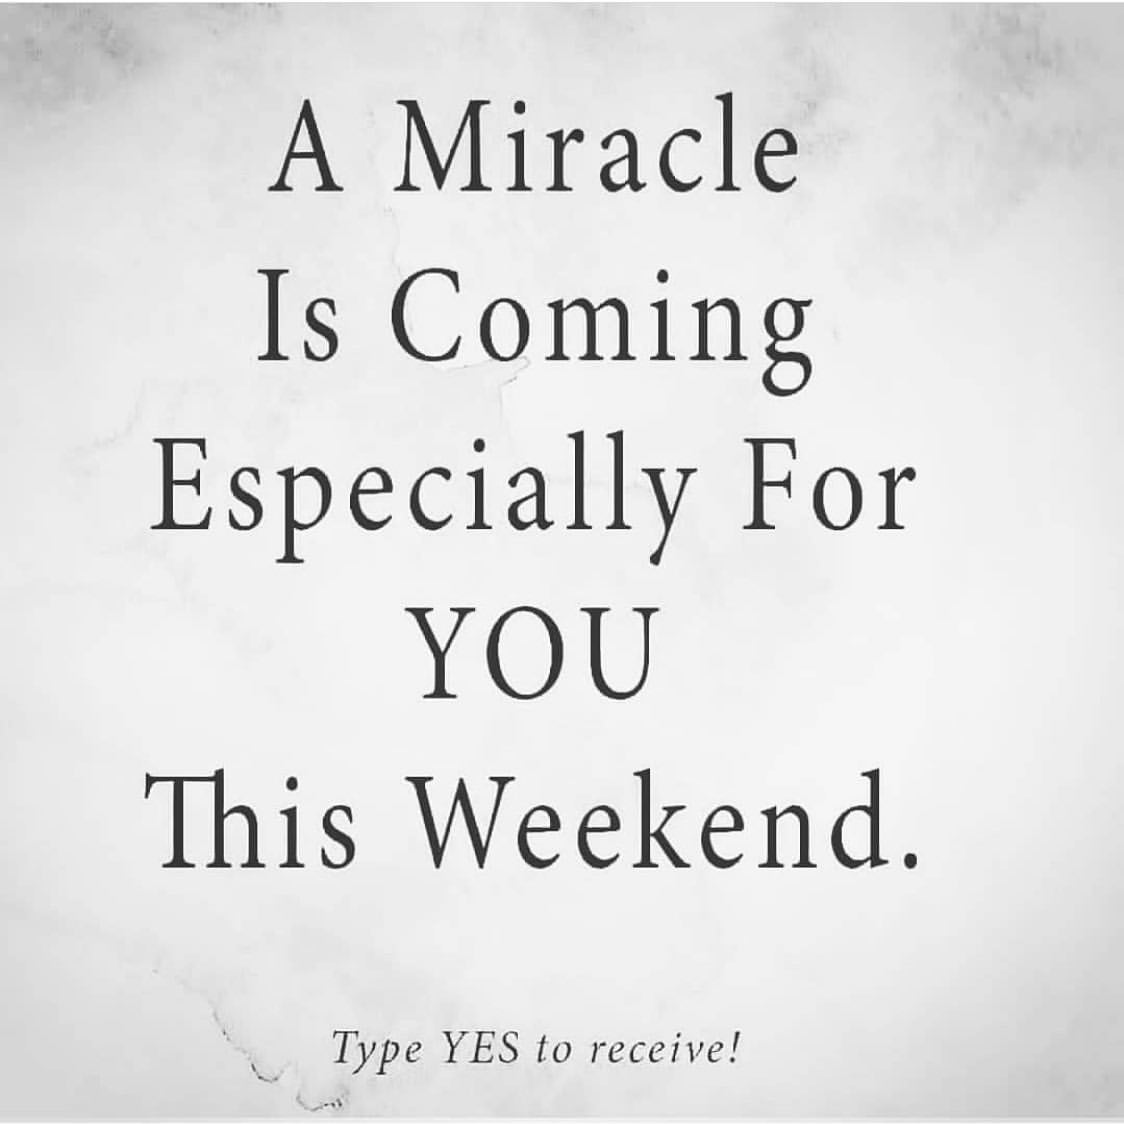 A miracle is coming especially for you this weekend.